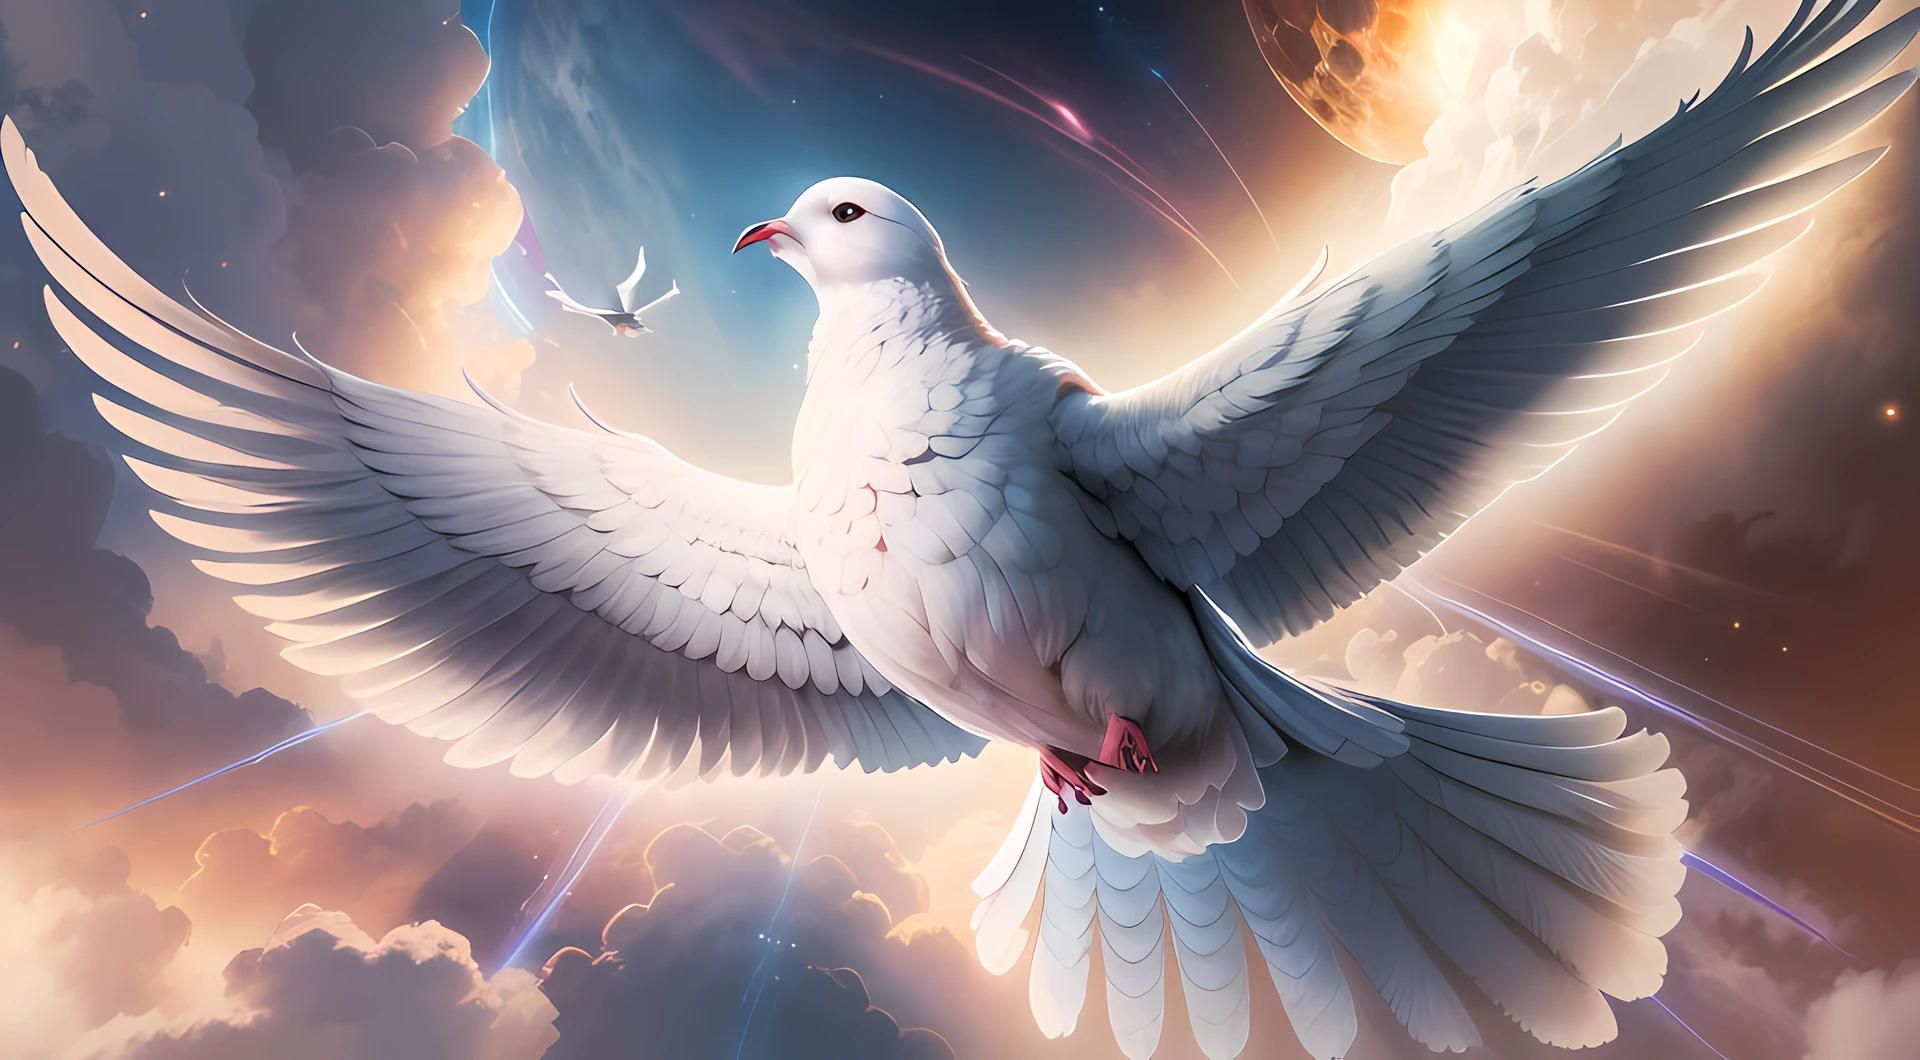 a white dove flying in the sky with a bright light coming out of it, pomba branca, holy spirit, ophanim has bird wings, pombas voando no portal, onde, em paz, pombas, majestosas asas de pomba grande, she is arriving heaven, beautiful image ever created, Luz Celestial, background is celestial, papel de parede hd, celestial, heaven on earth, in sky, pegue a chave, lua bela, fora, noite linda